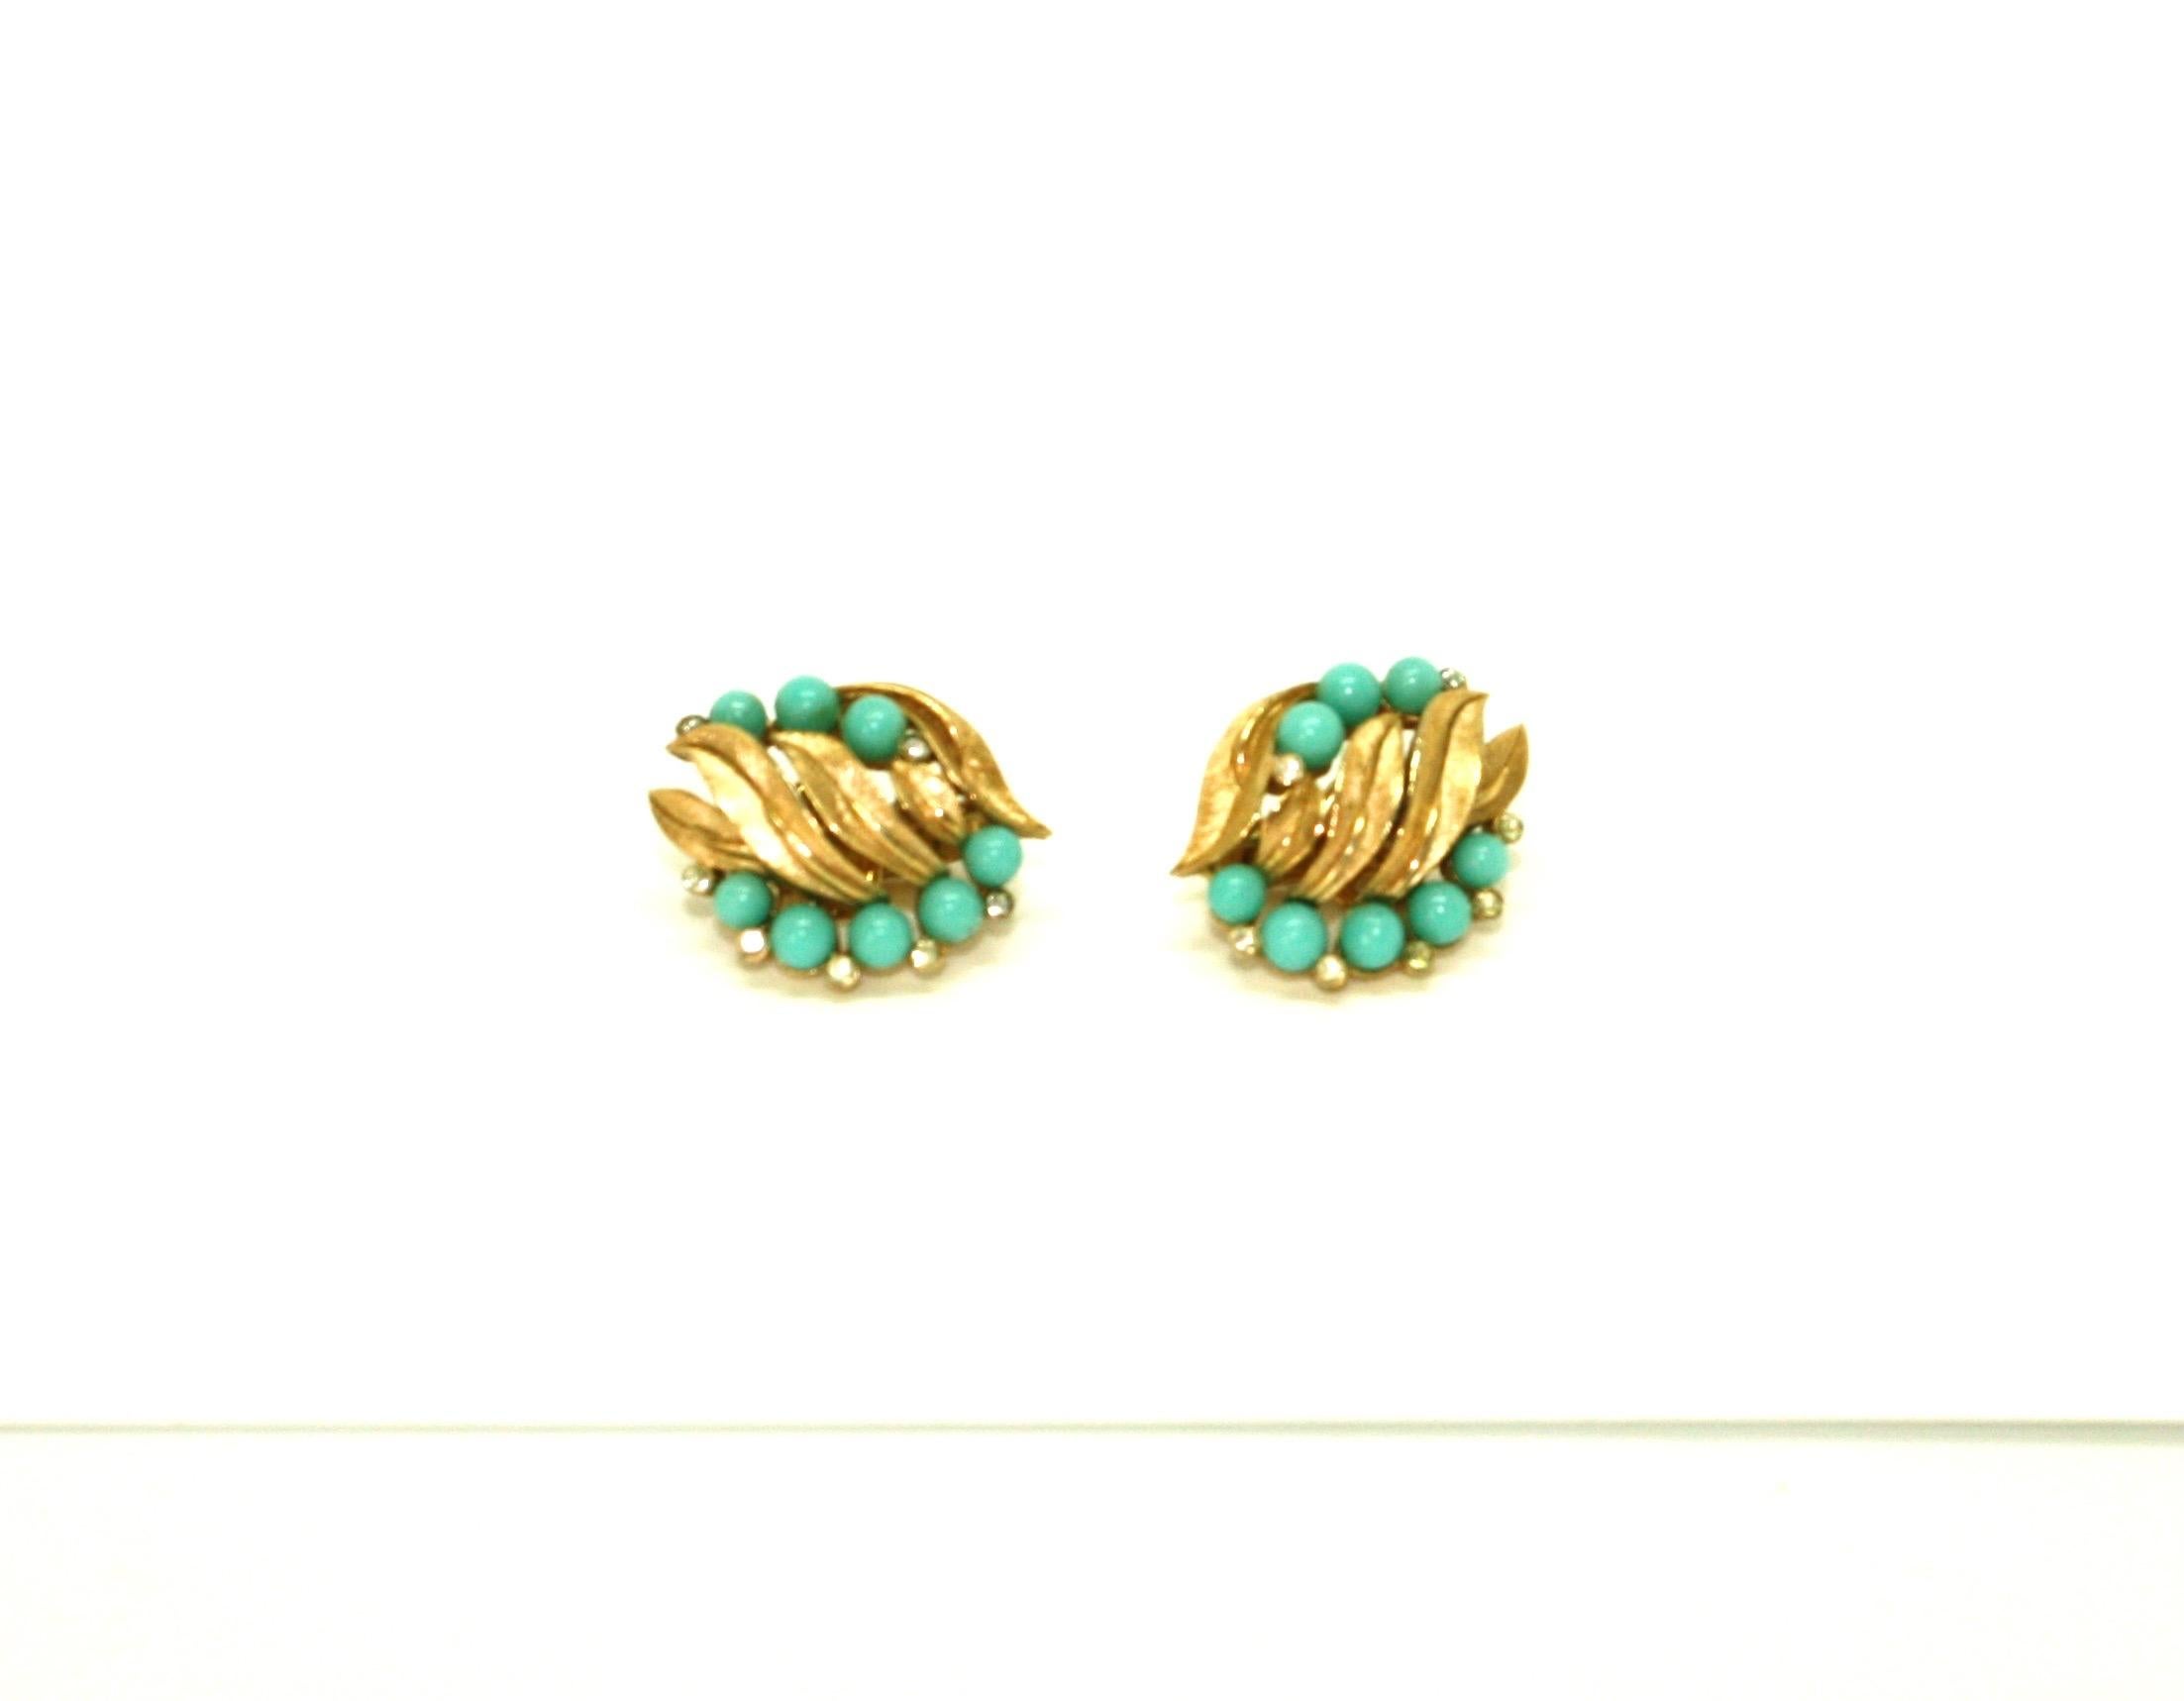 Faux Turquoise Clip Earrings by Trifari In Excellent Condition For Sale In Rushden, GB